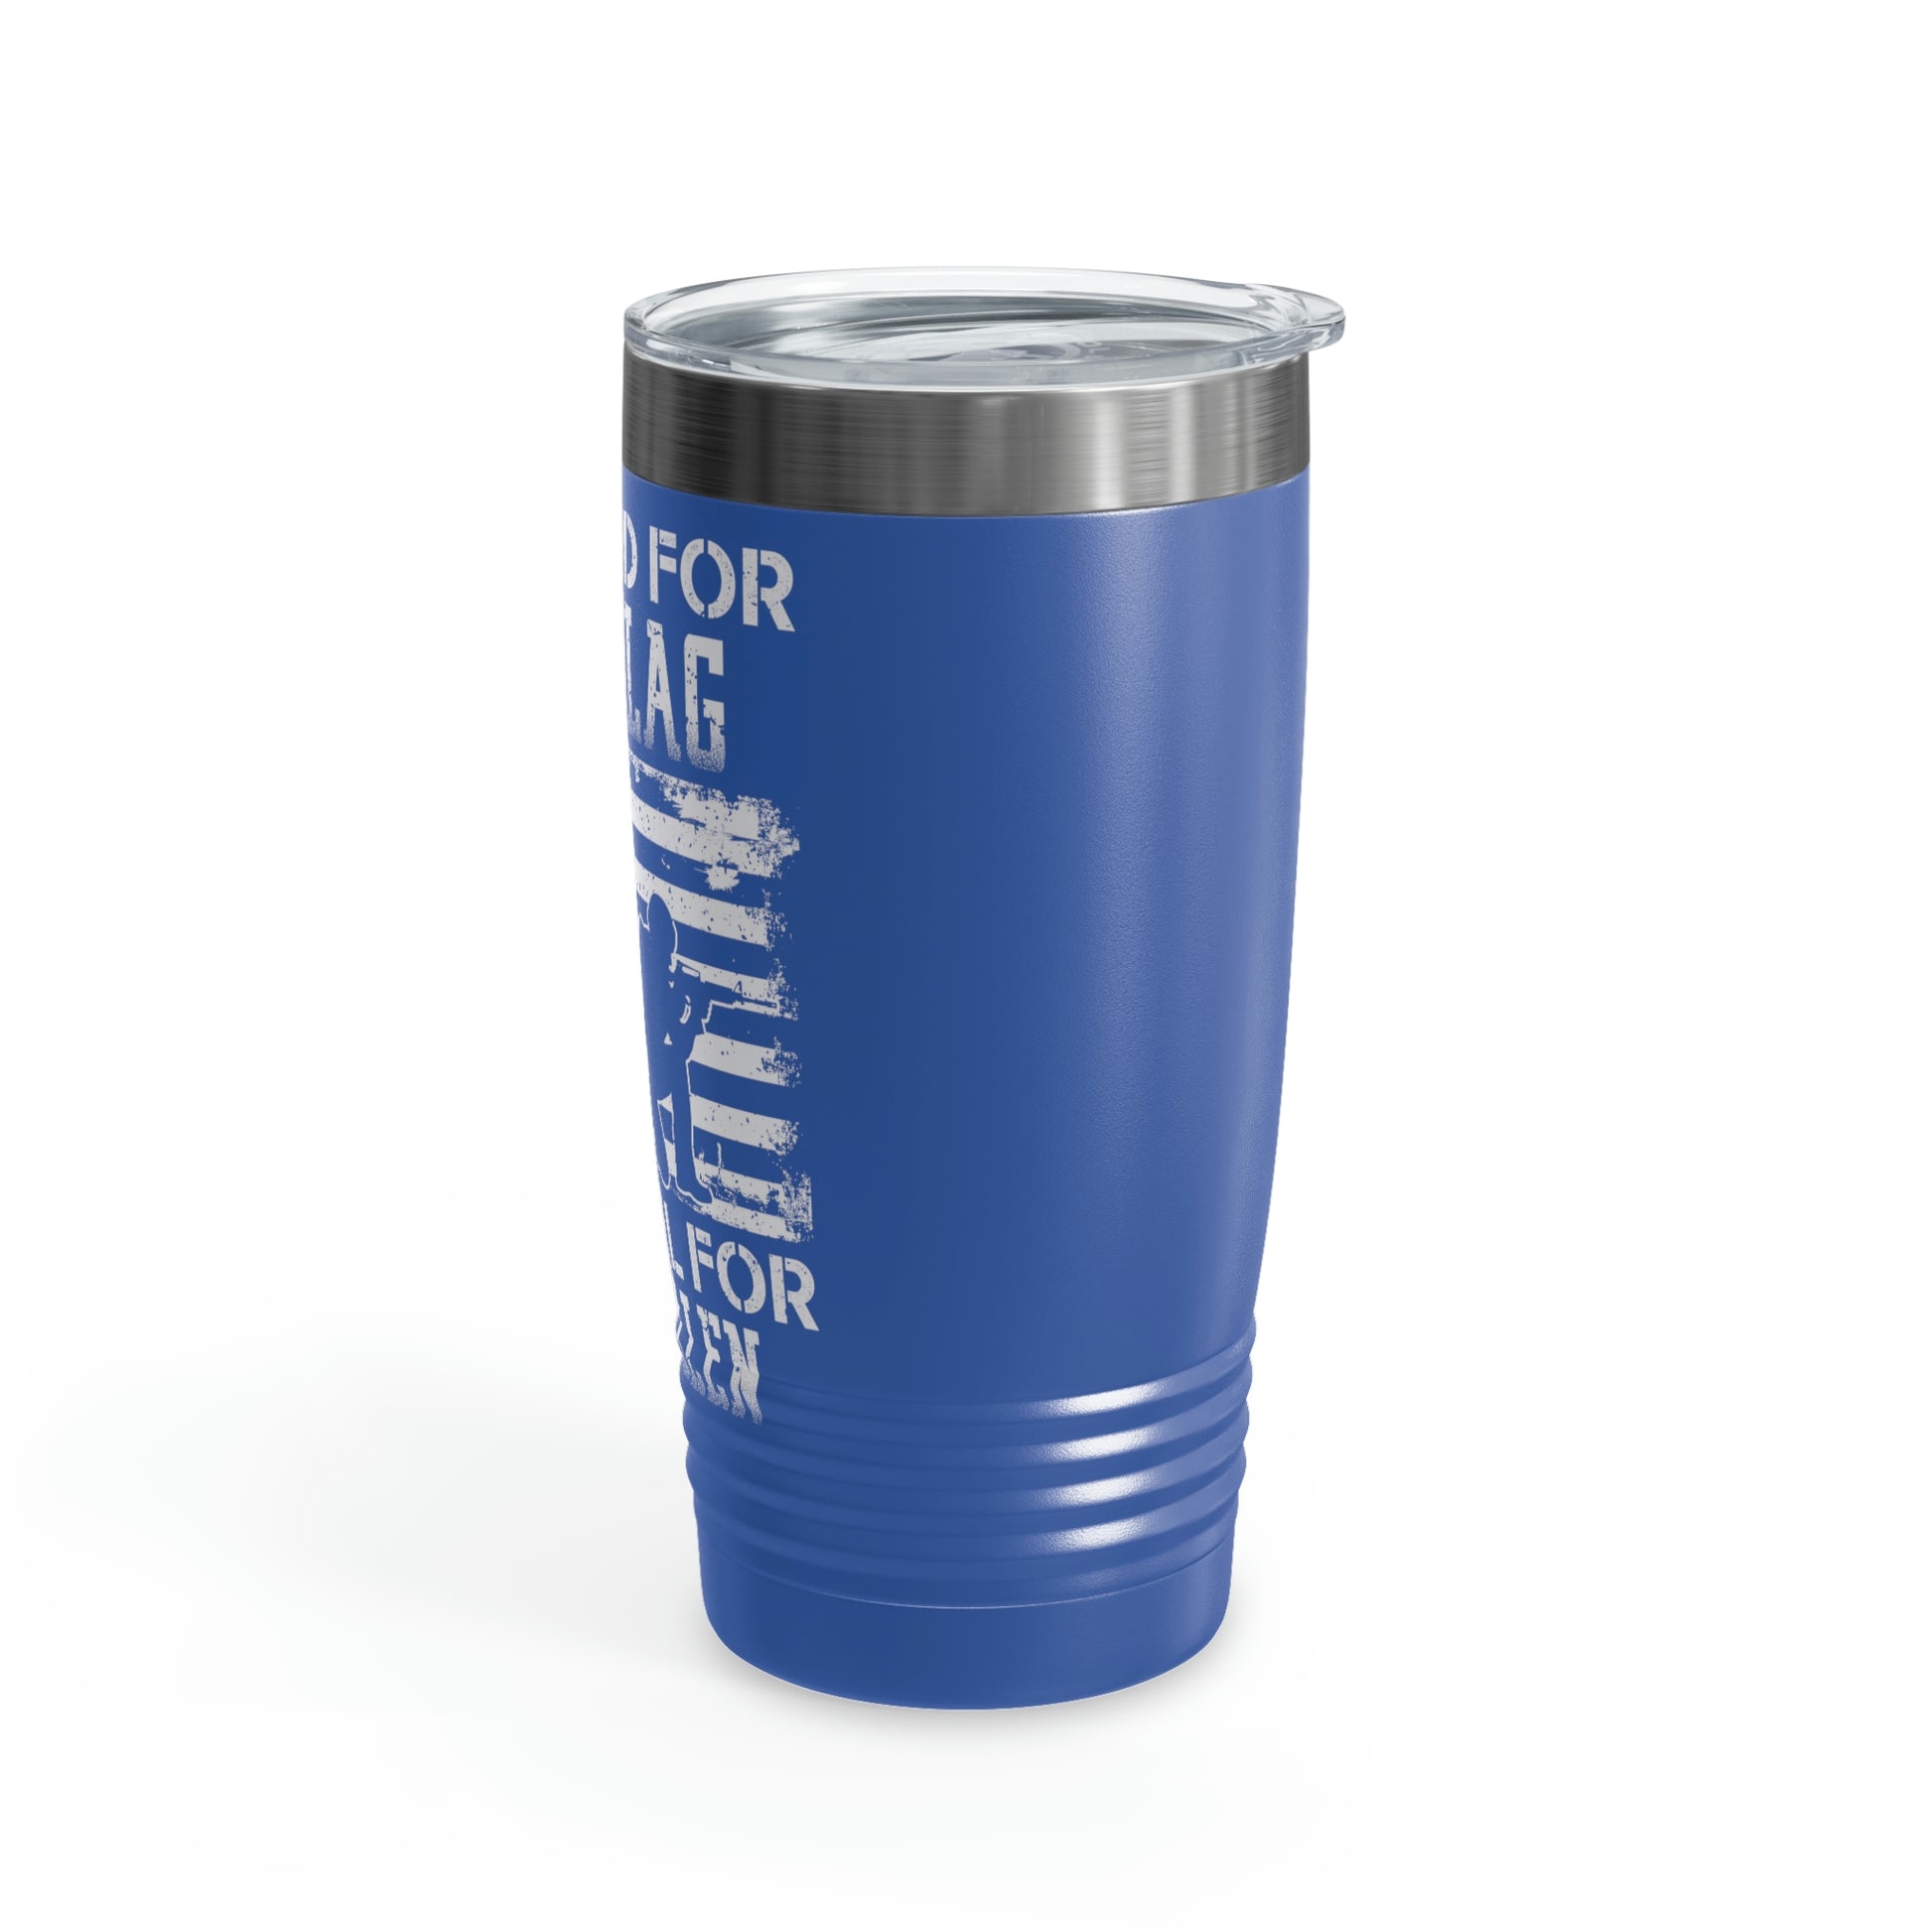 "Stand For The Flag" Ringneck Tumbler, 20oz - Weave Got Gifts - Unique Gifts You Won’t Find Anywhere Else!